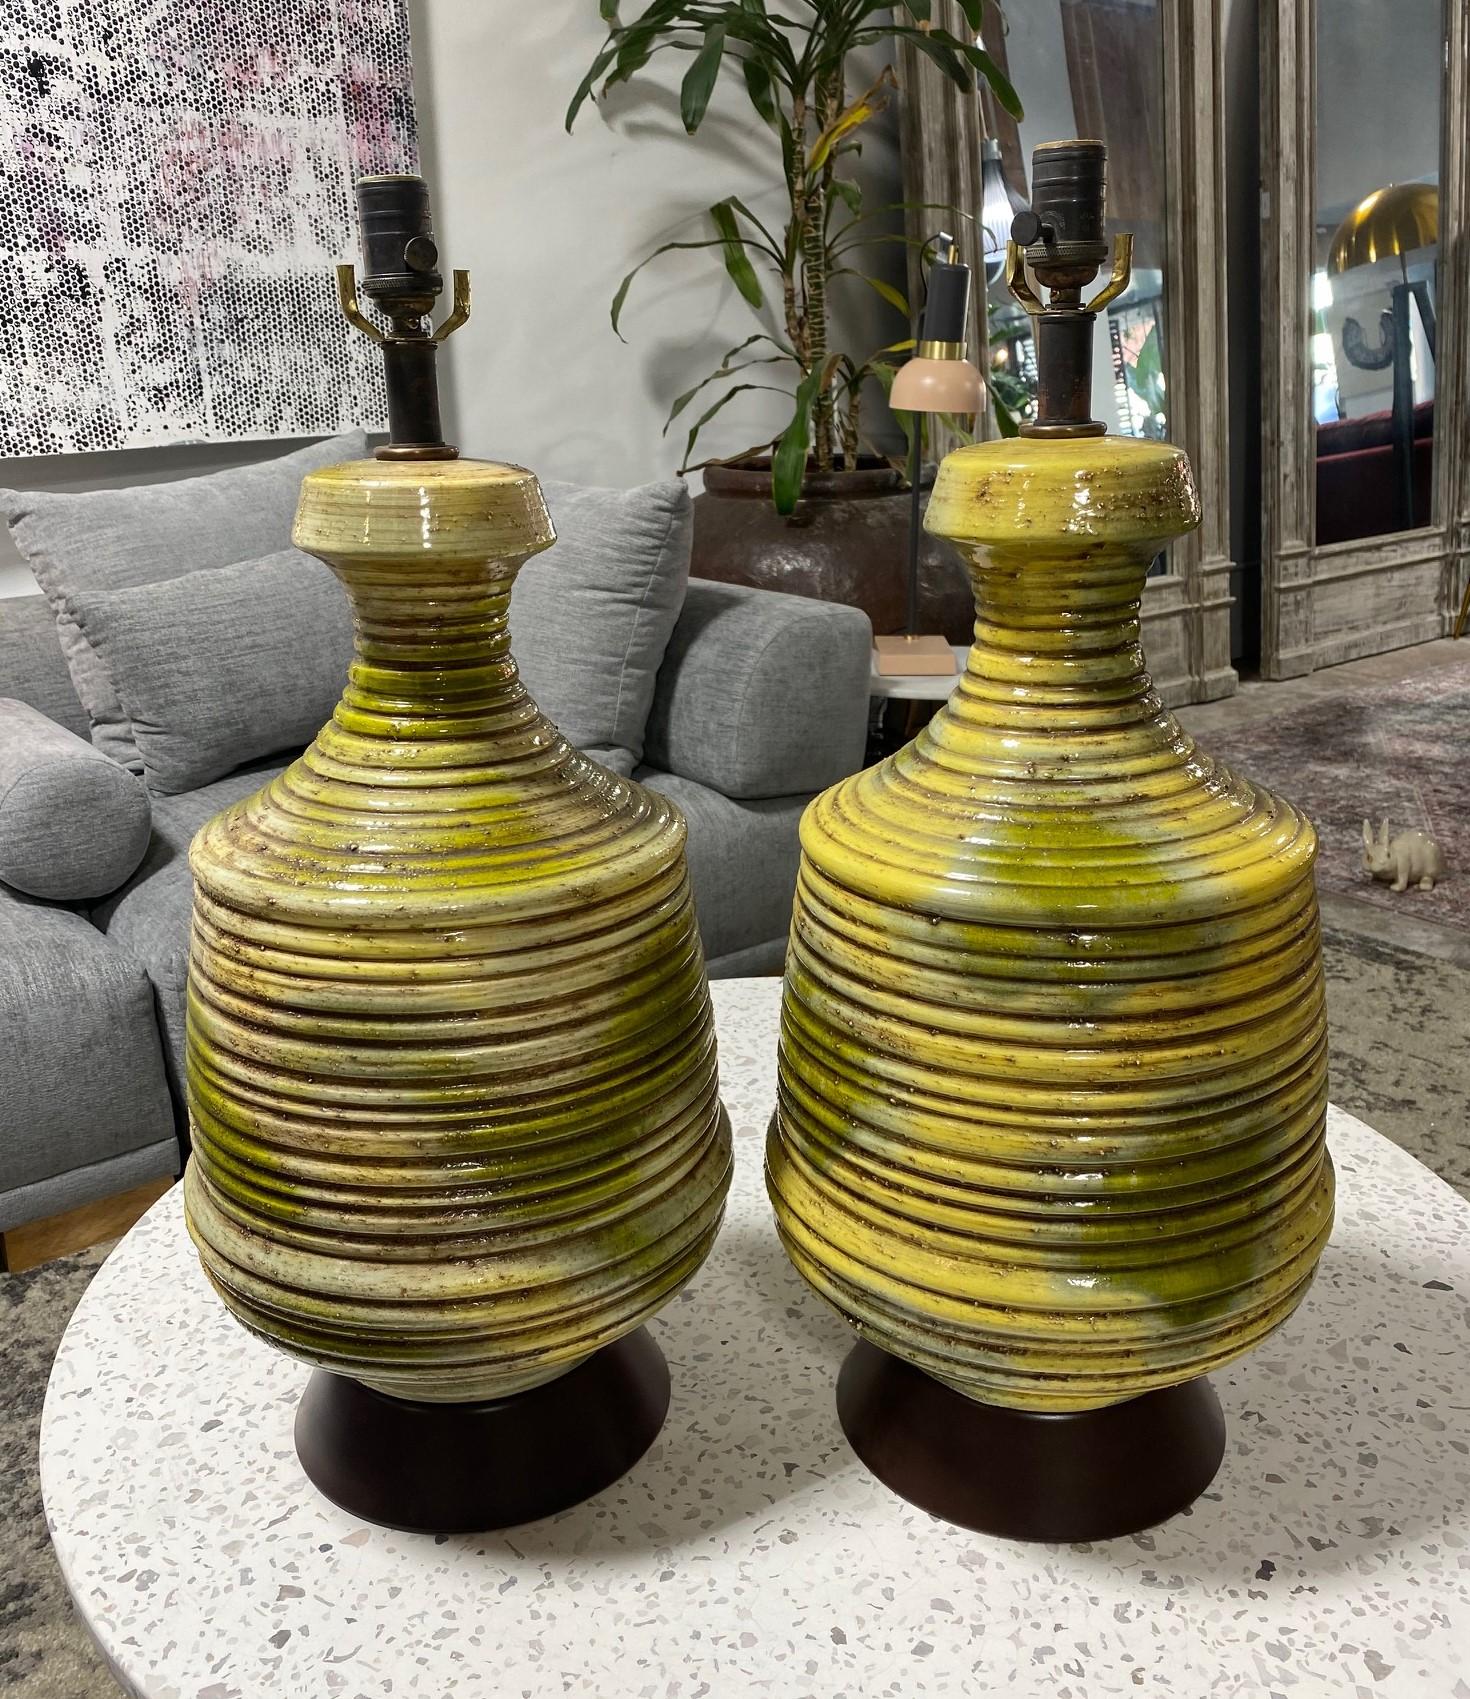 A pair of fabulous Mid-Century Modern green and yellow lava-glazed ribbed ceramic table lamps. Quite fantastic, beautifully colored, and designed. Caught our eye right away. The lamps are fitted to a metal base. 

Would stand out in about any